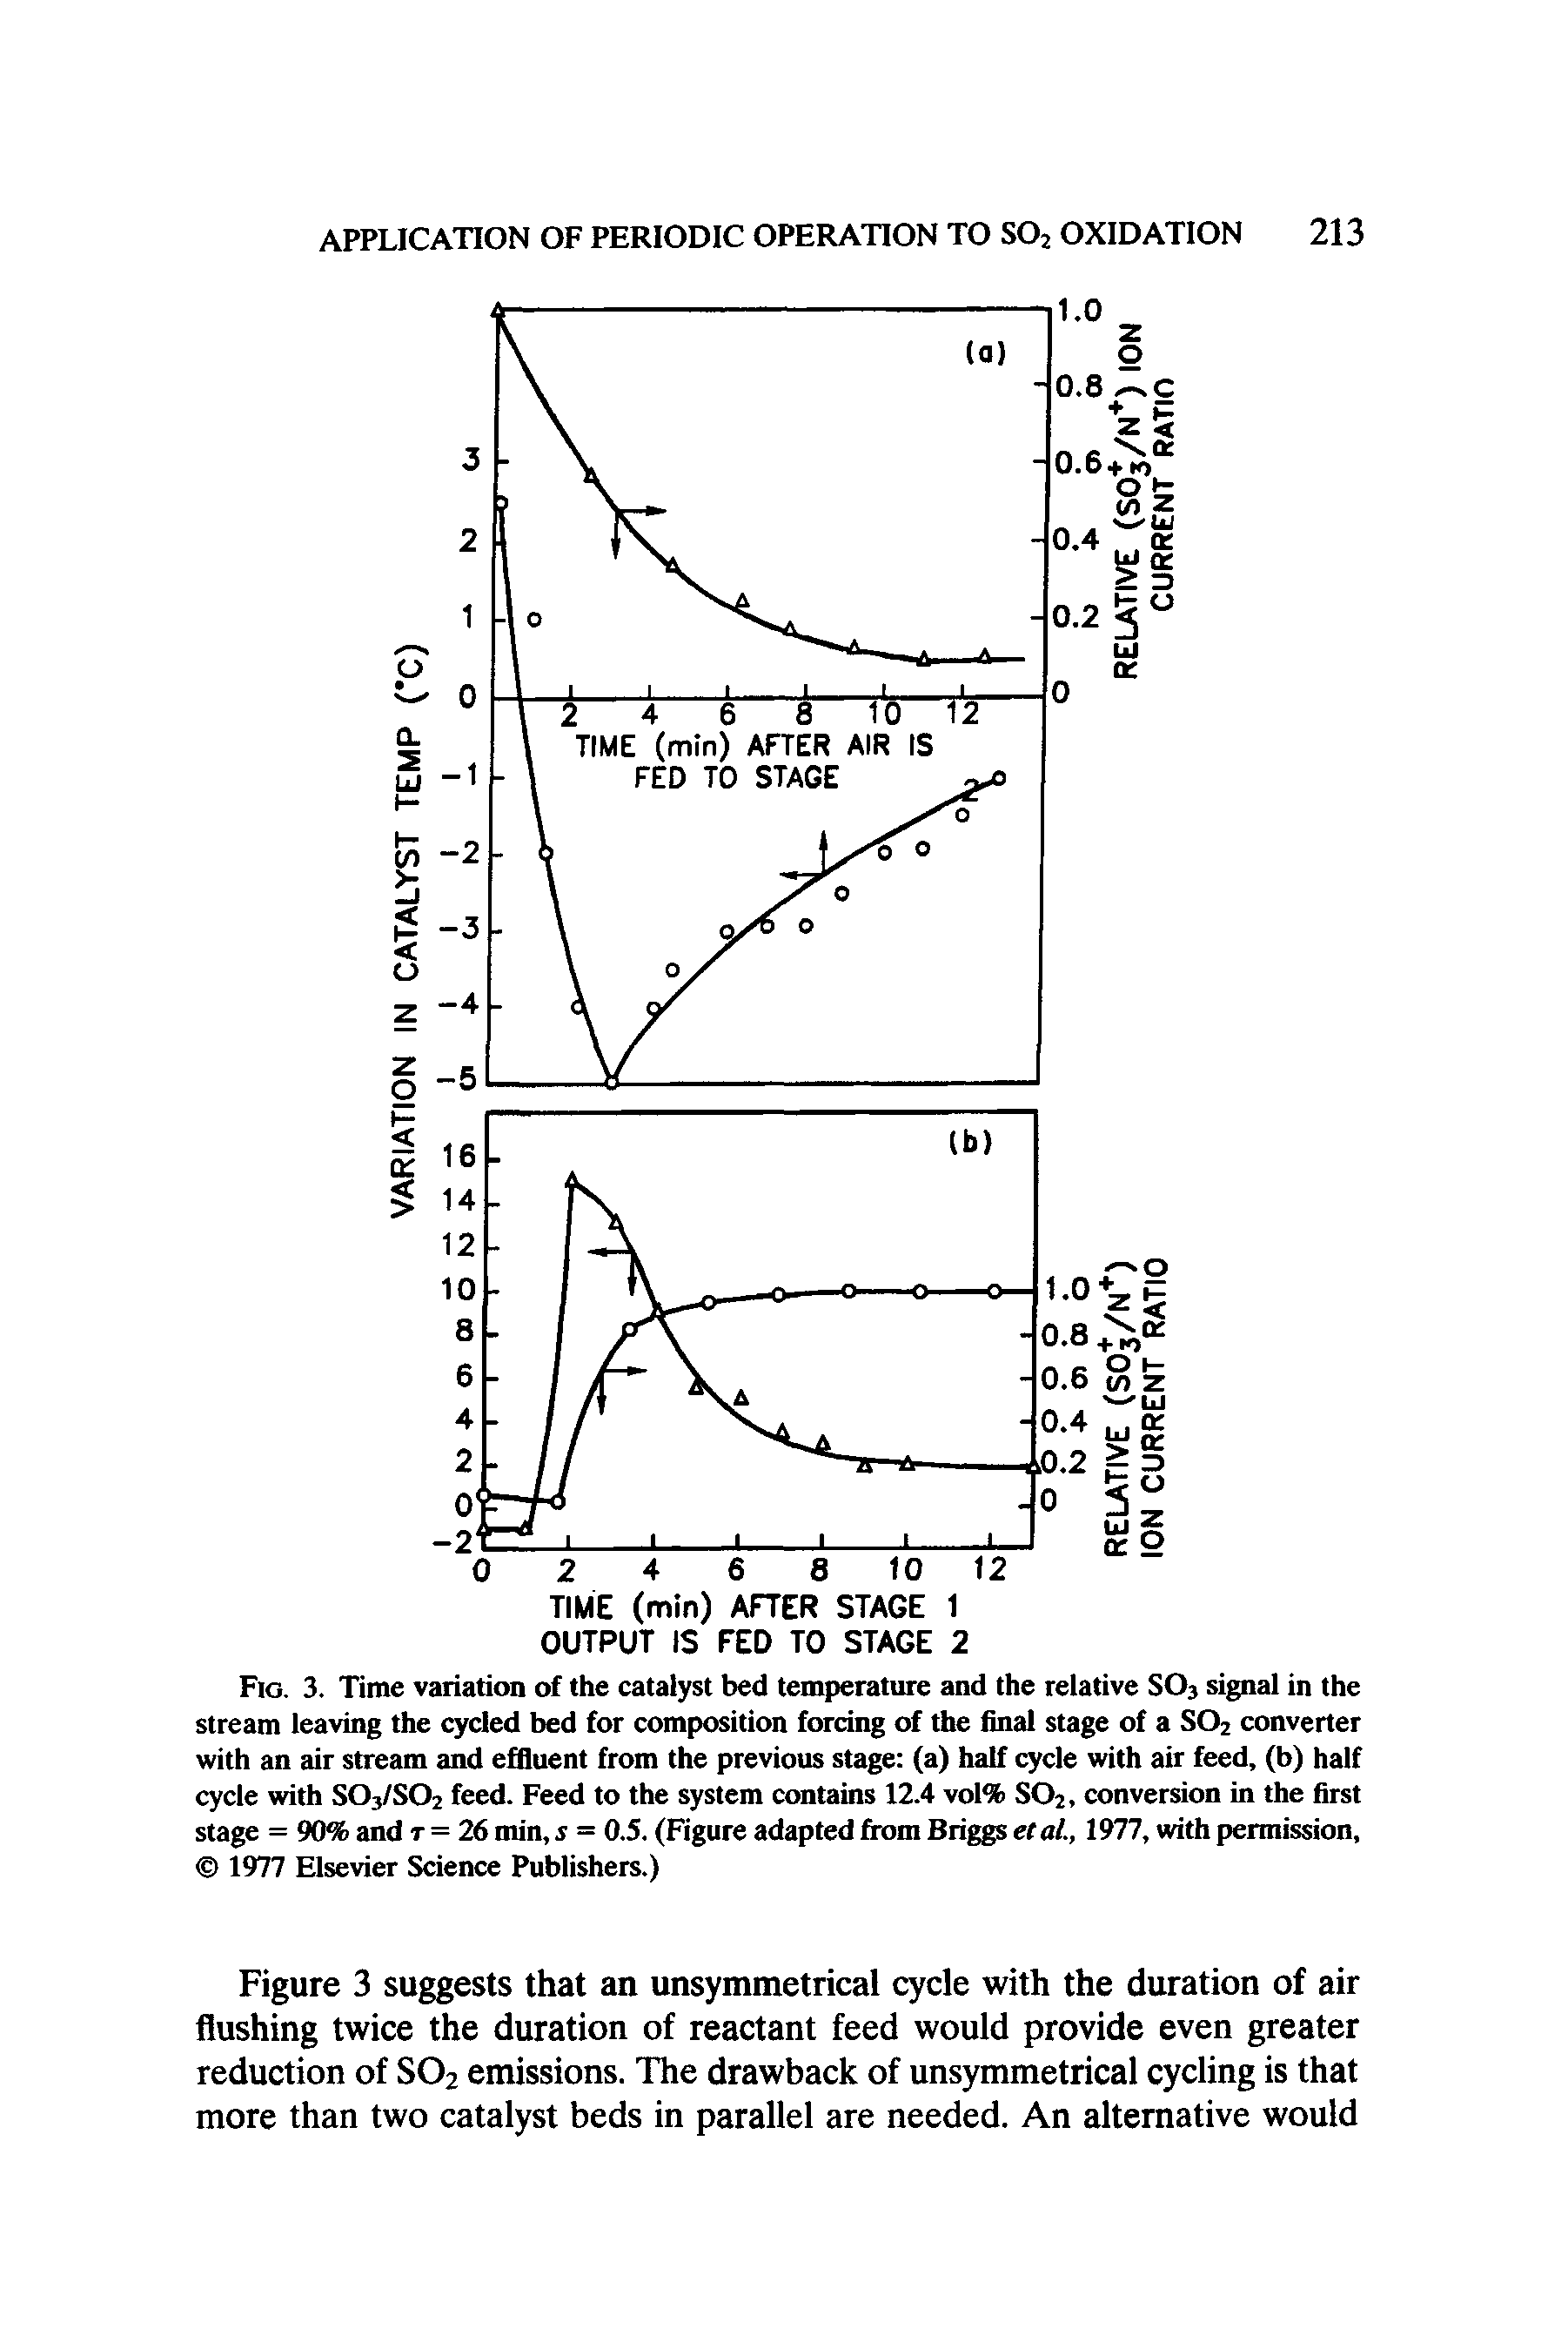 Fig. 3. Time variation of the catalyst bed temperature and the relative S03 signal in the stream leaving the cycled bed for composition forcing of the final stage of a S02 converter with an air stream and effluent from the previous stage (a) half cycle with air feed, (b) half cycle with S03/S02 feed. Feed to the system contains 12.4 vol% S02, conversion in the first stage = 90% and t = 26 min, s = 0.5. (Figure adapted from Briggs etal., 1977, with permission, 1977 Elsevier Science Publishers.)...